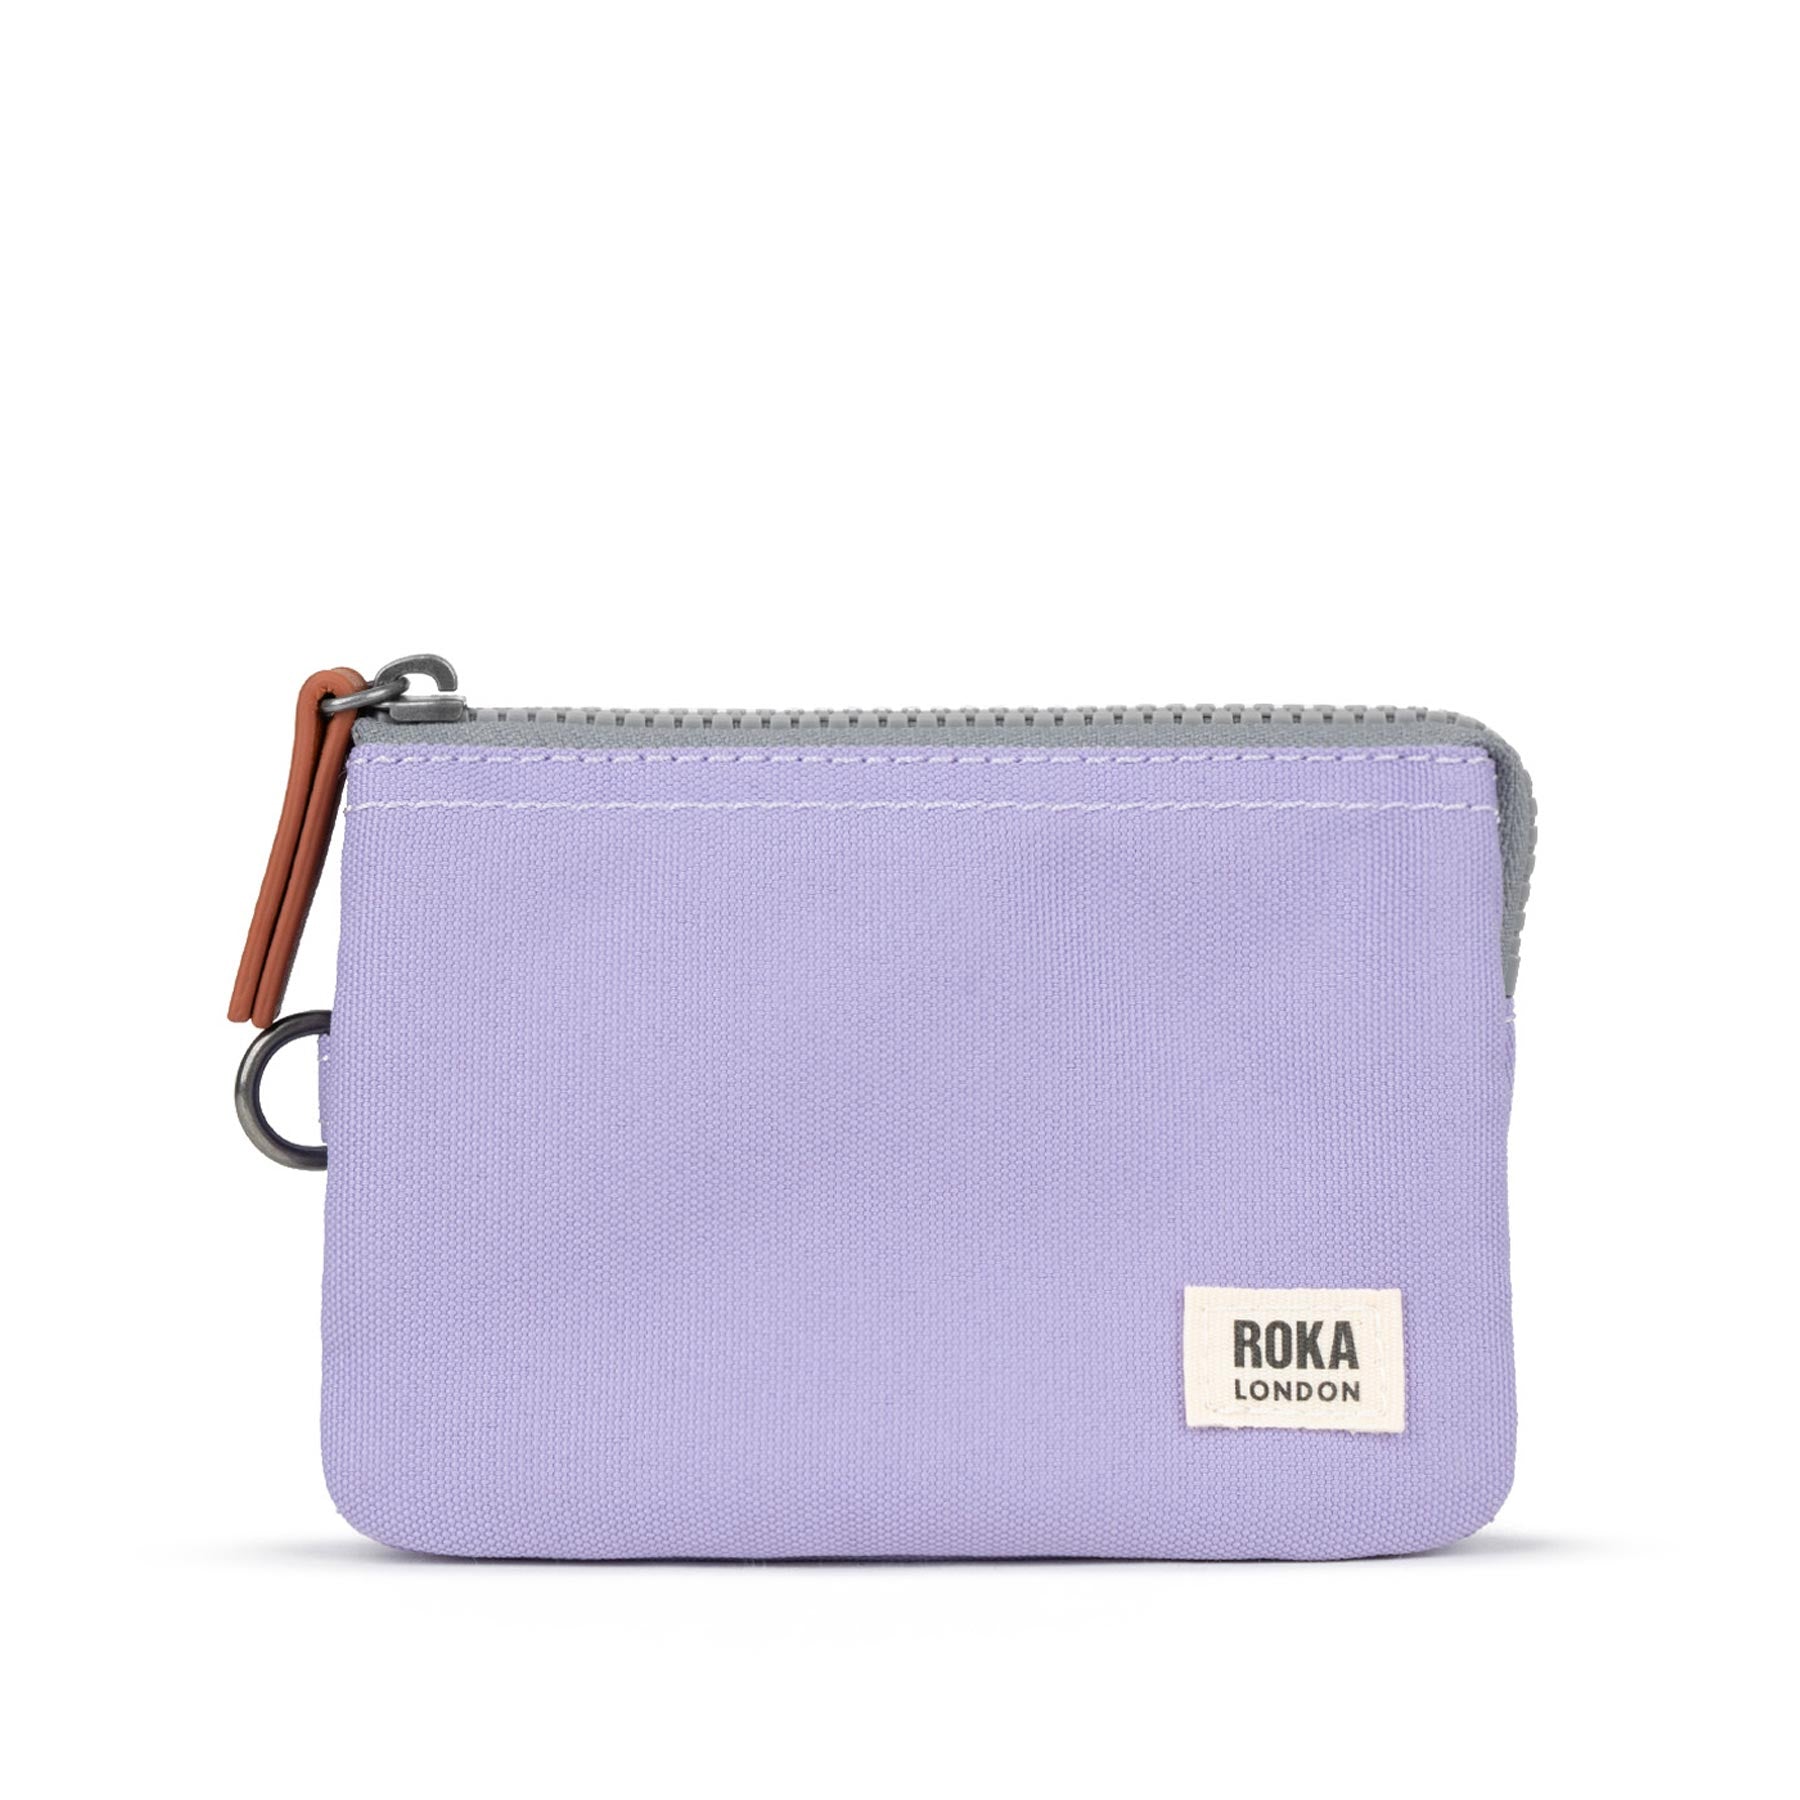 Carnaby lavender small wallet